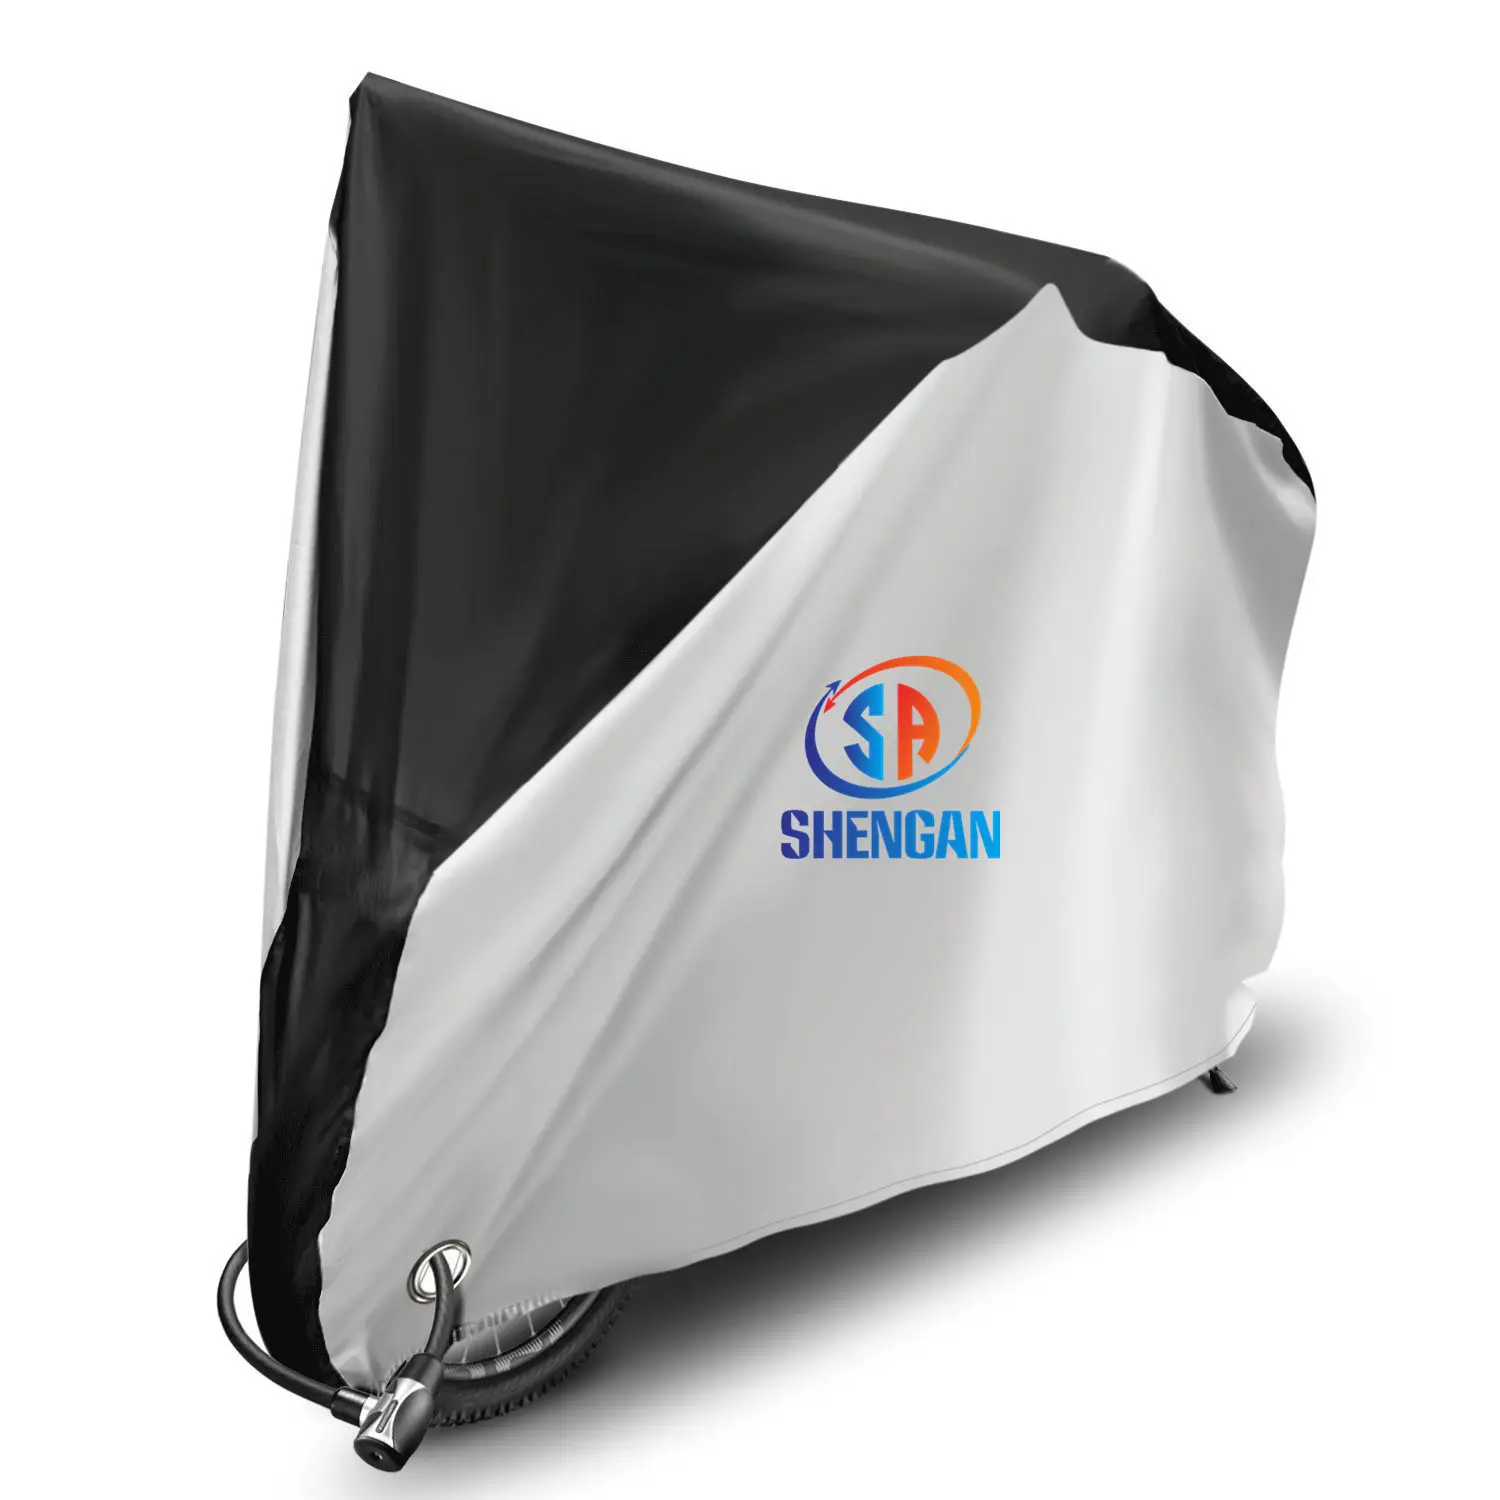 WATERPROOF SINGLE BIKE COVER CYCLE SCOOTER RAIN RESISTANCE COVER BICYCLE COVER